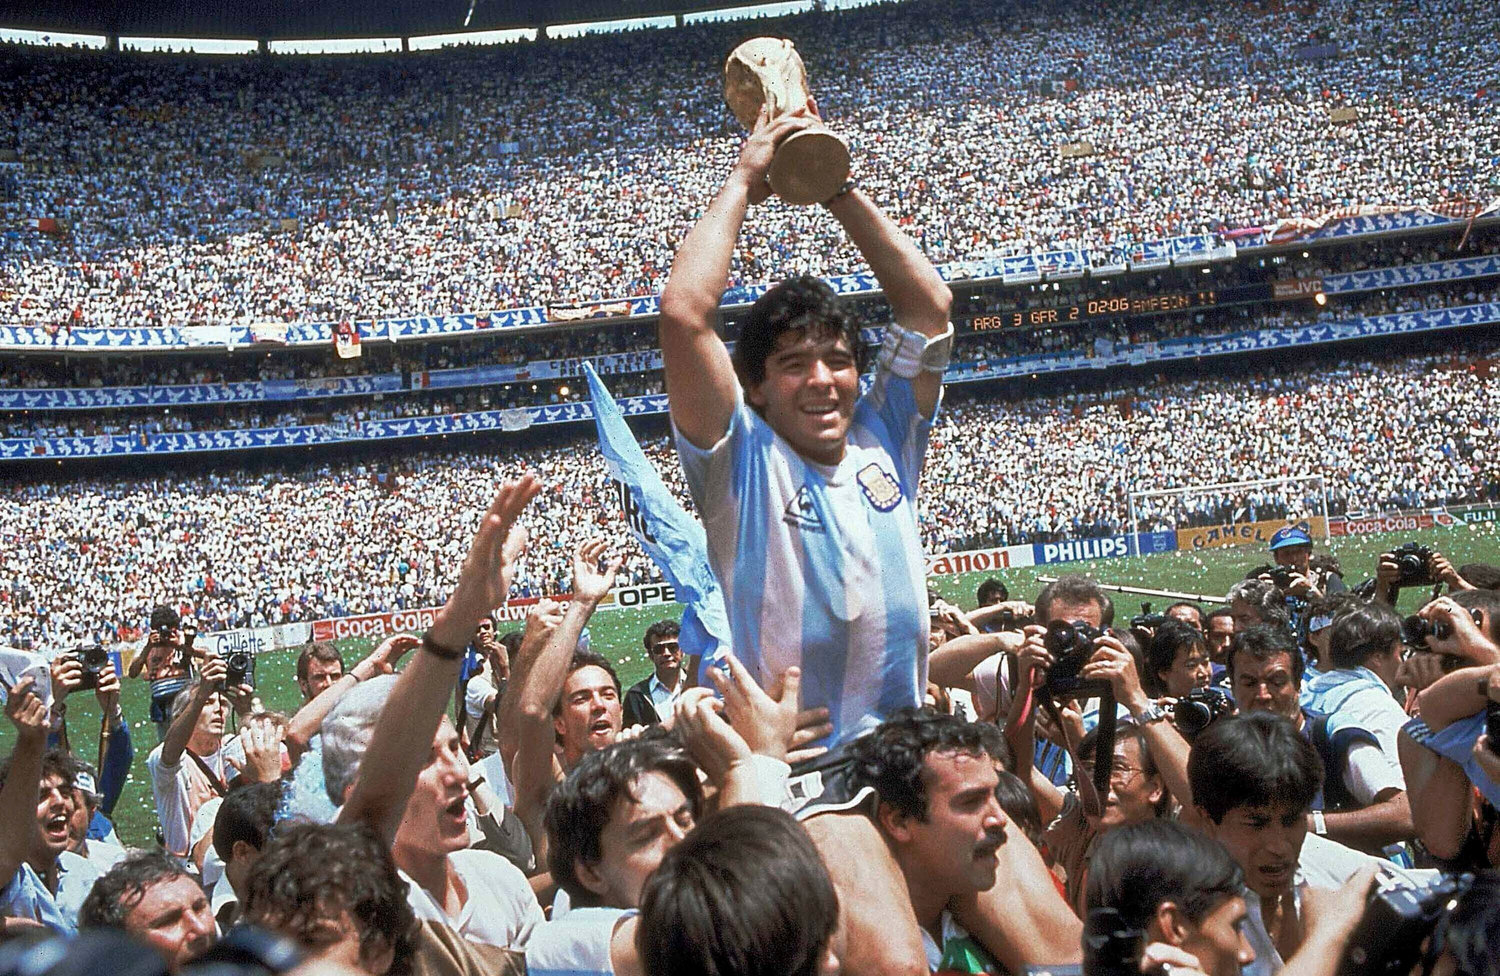 SOCCER LEGEND DIES — In this June 29, 1986, file photo, Diego Maradona holds up his team’s trophy after Argentina’s 3-2 victory over West Germany at the World Cup final soccer match at Azteca Stadium in Mexico City. The Argentine soccer great, who was among the best players ever and who led his country to the 1986 World Cup title before later struggling with cocaine use and obesity, died from a heart attack on Wednesday at his home in Buenos Aires. He was 60.